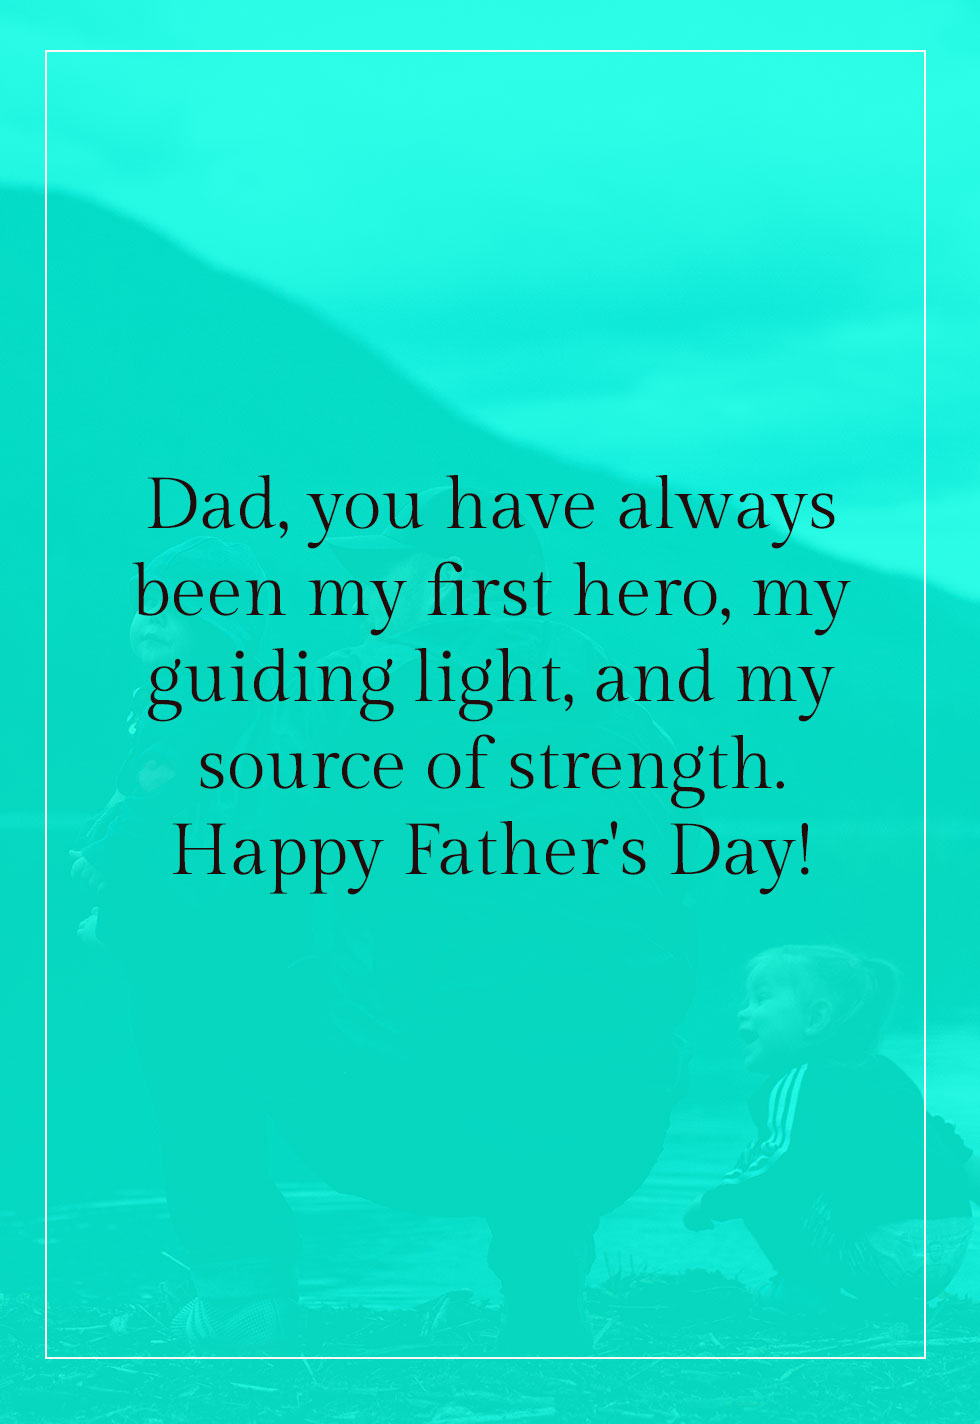 happy-fathers-day-quotes